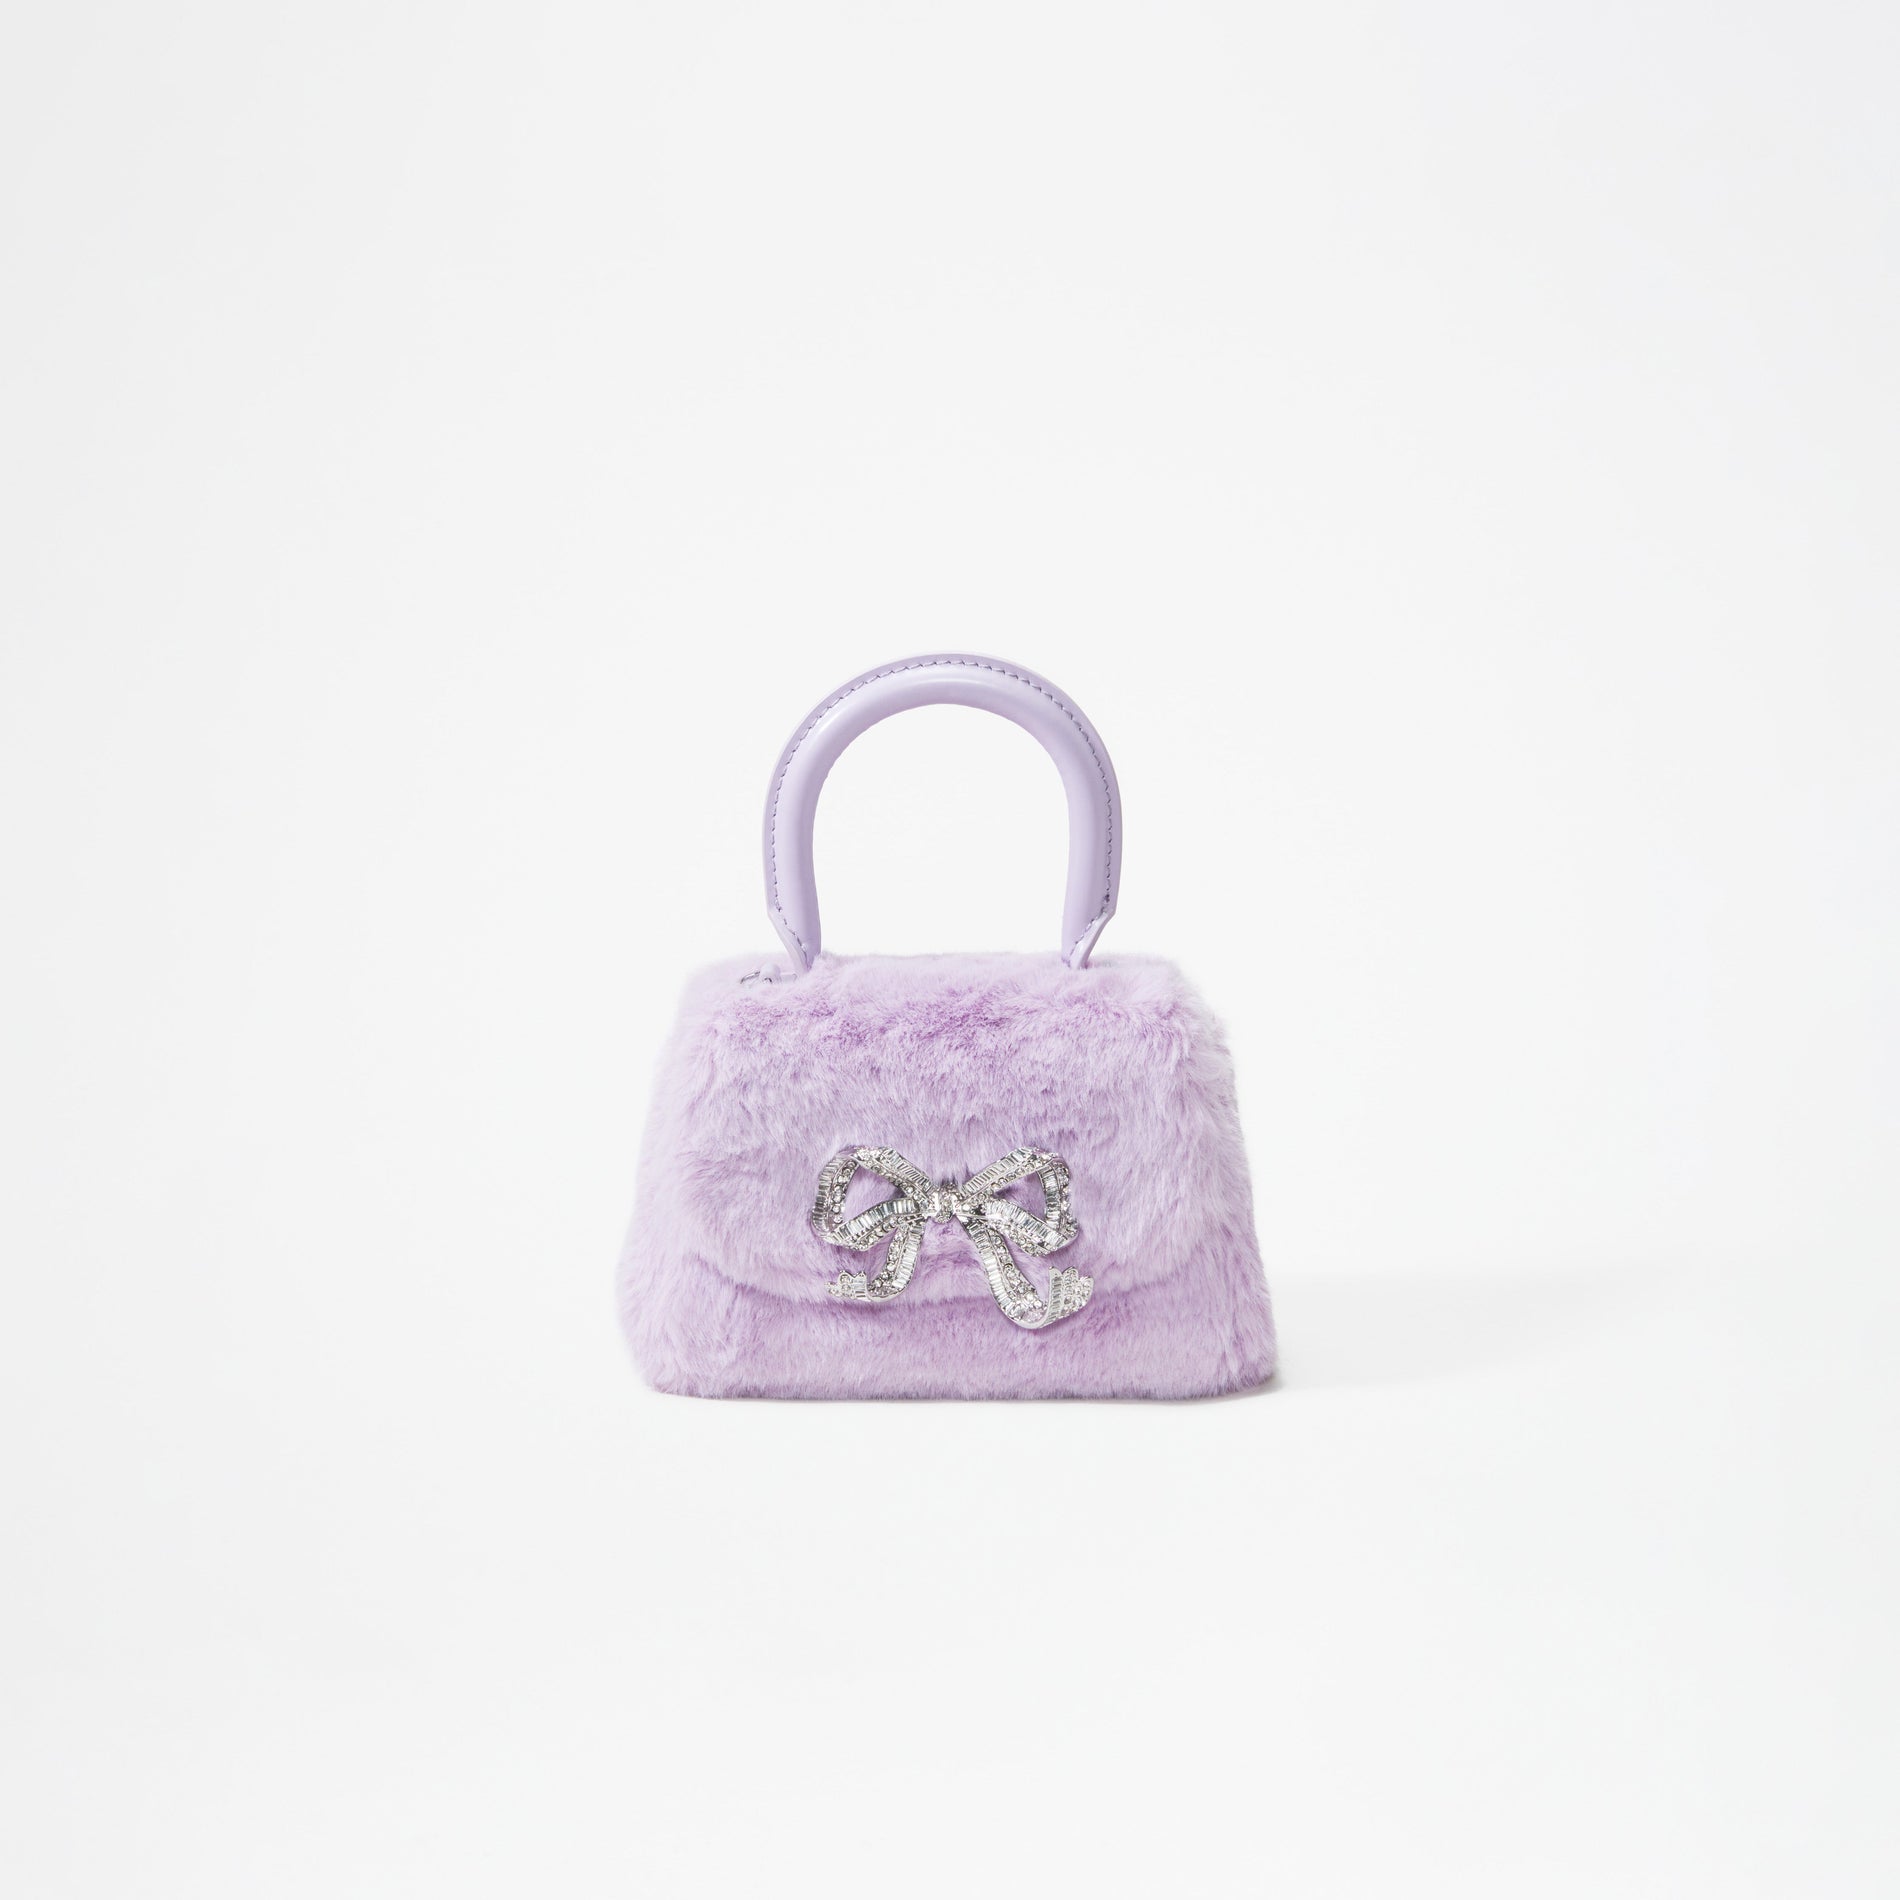 A woman wearing the Lilac Fluffy Bow Micro Bag